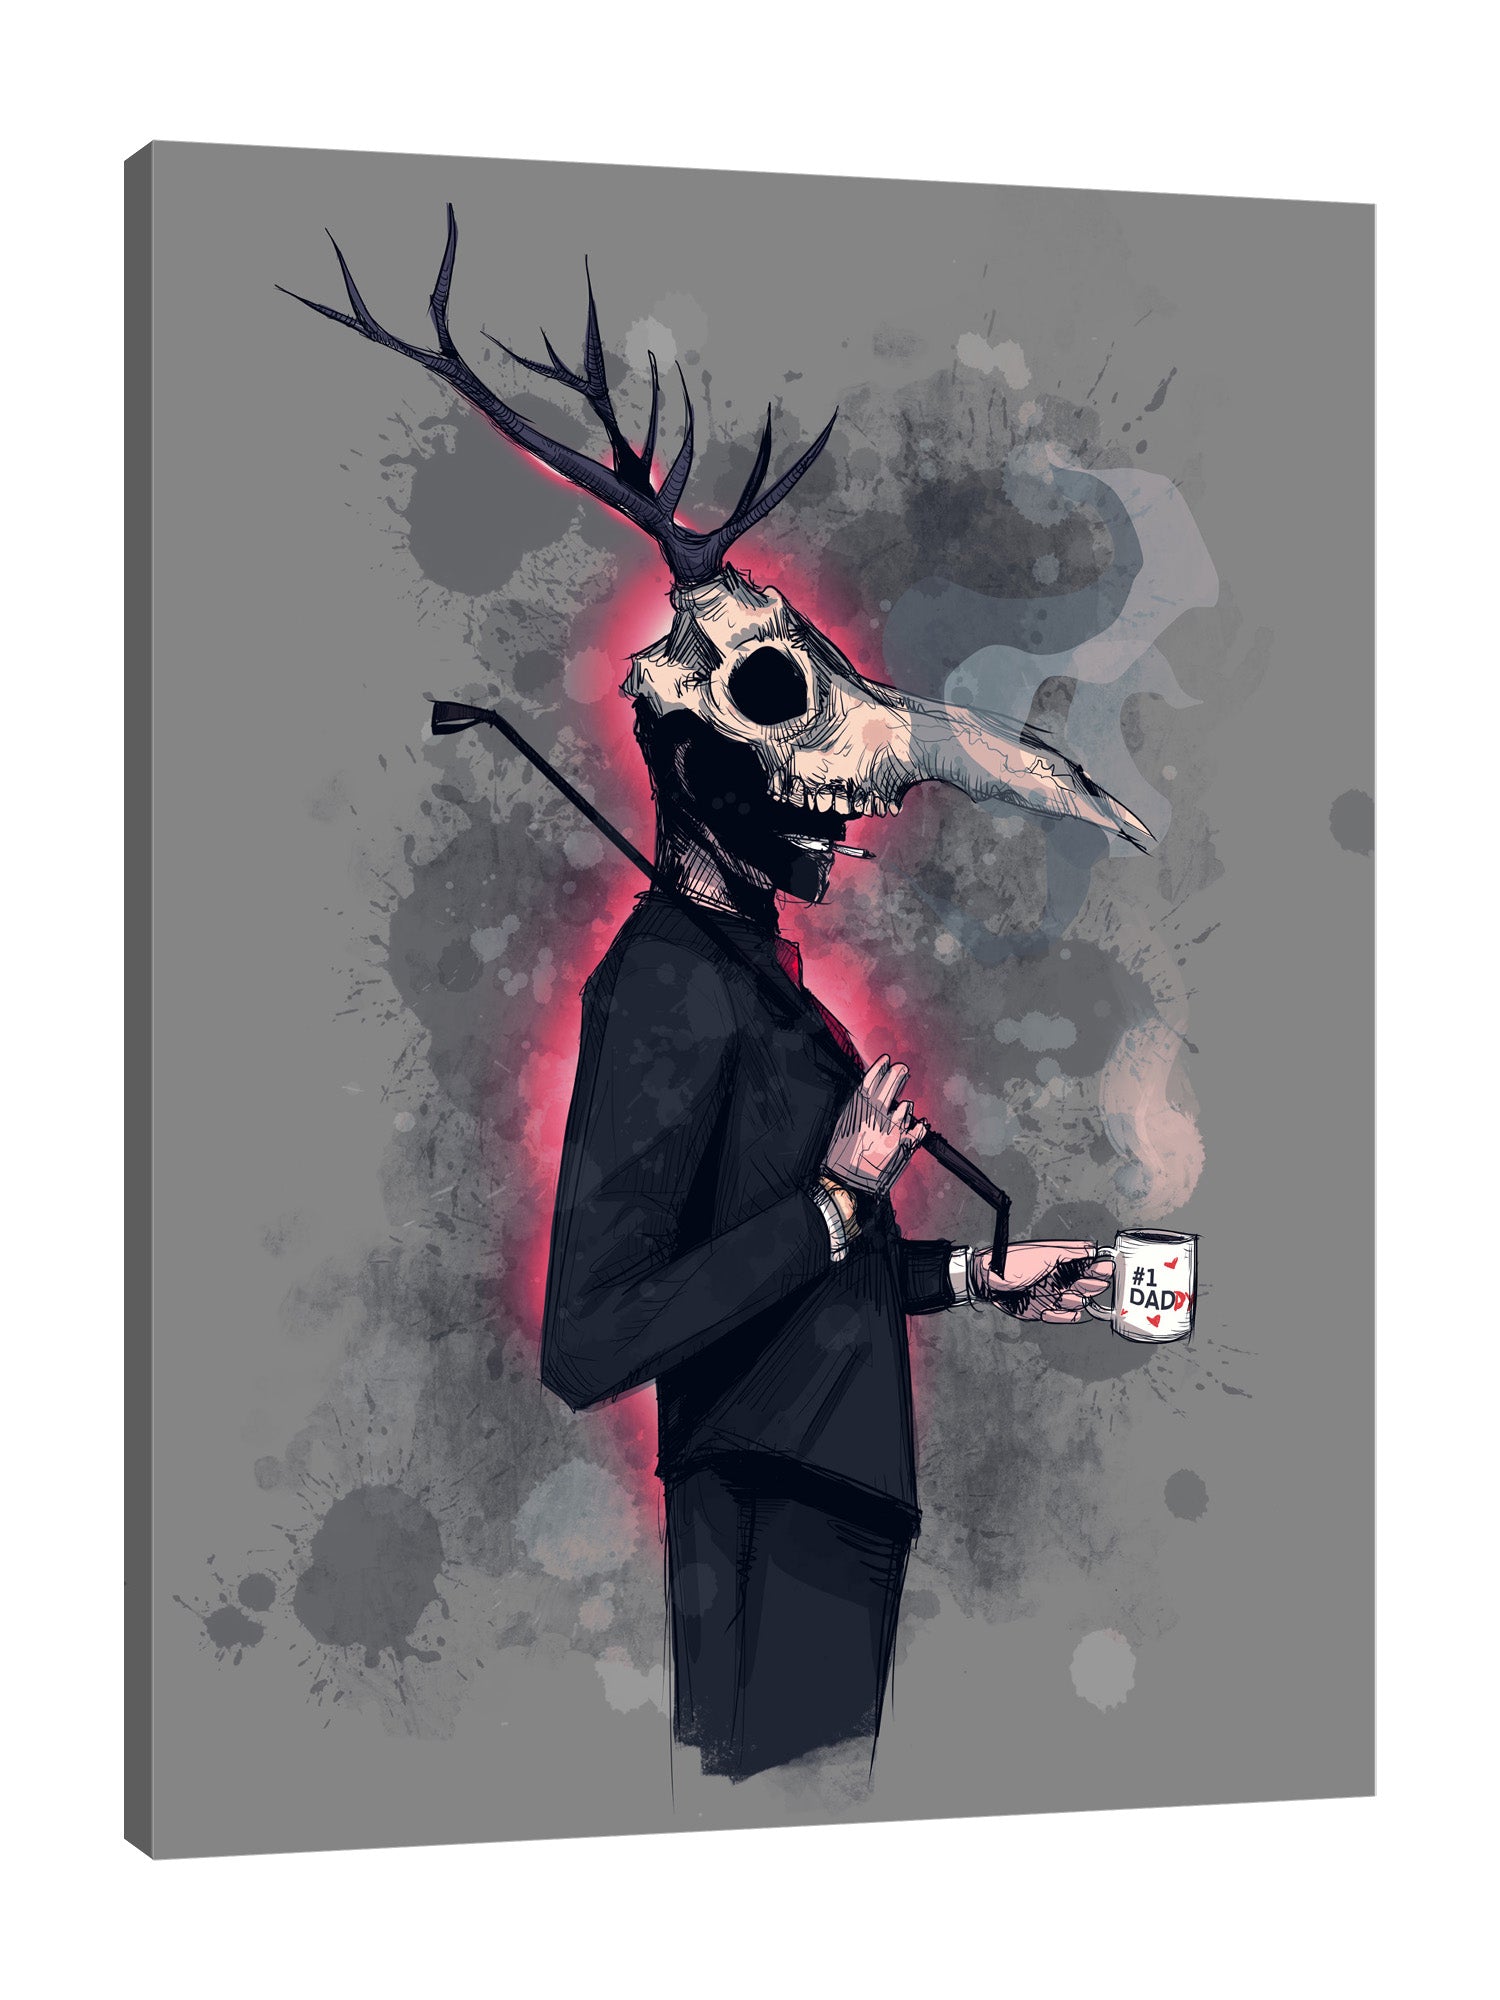 Ludwig-Van-Bacon,Vertical,3X4,Modern & Contemporary,Entertainment,People,Fantasy & Sci-Fi,bdsm,cosplay,words,deer,horns,suits,dad,costume,cup,holding,mug,smoking,smoke,whip,whips,Charcoal Gray,Red,Purple,Blue